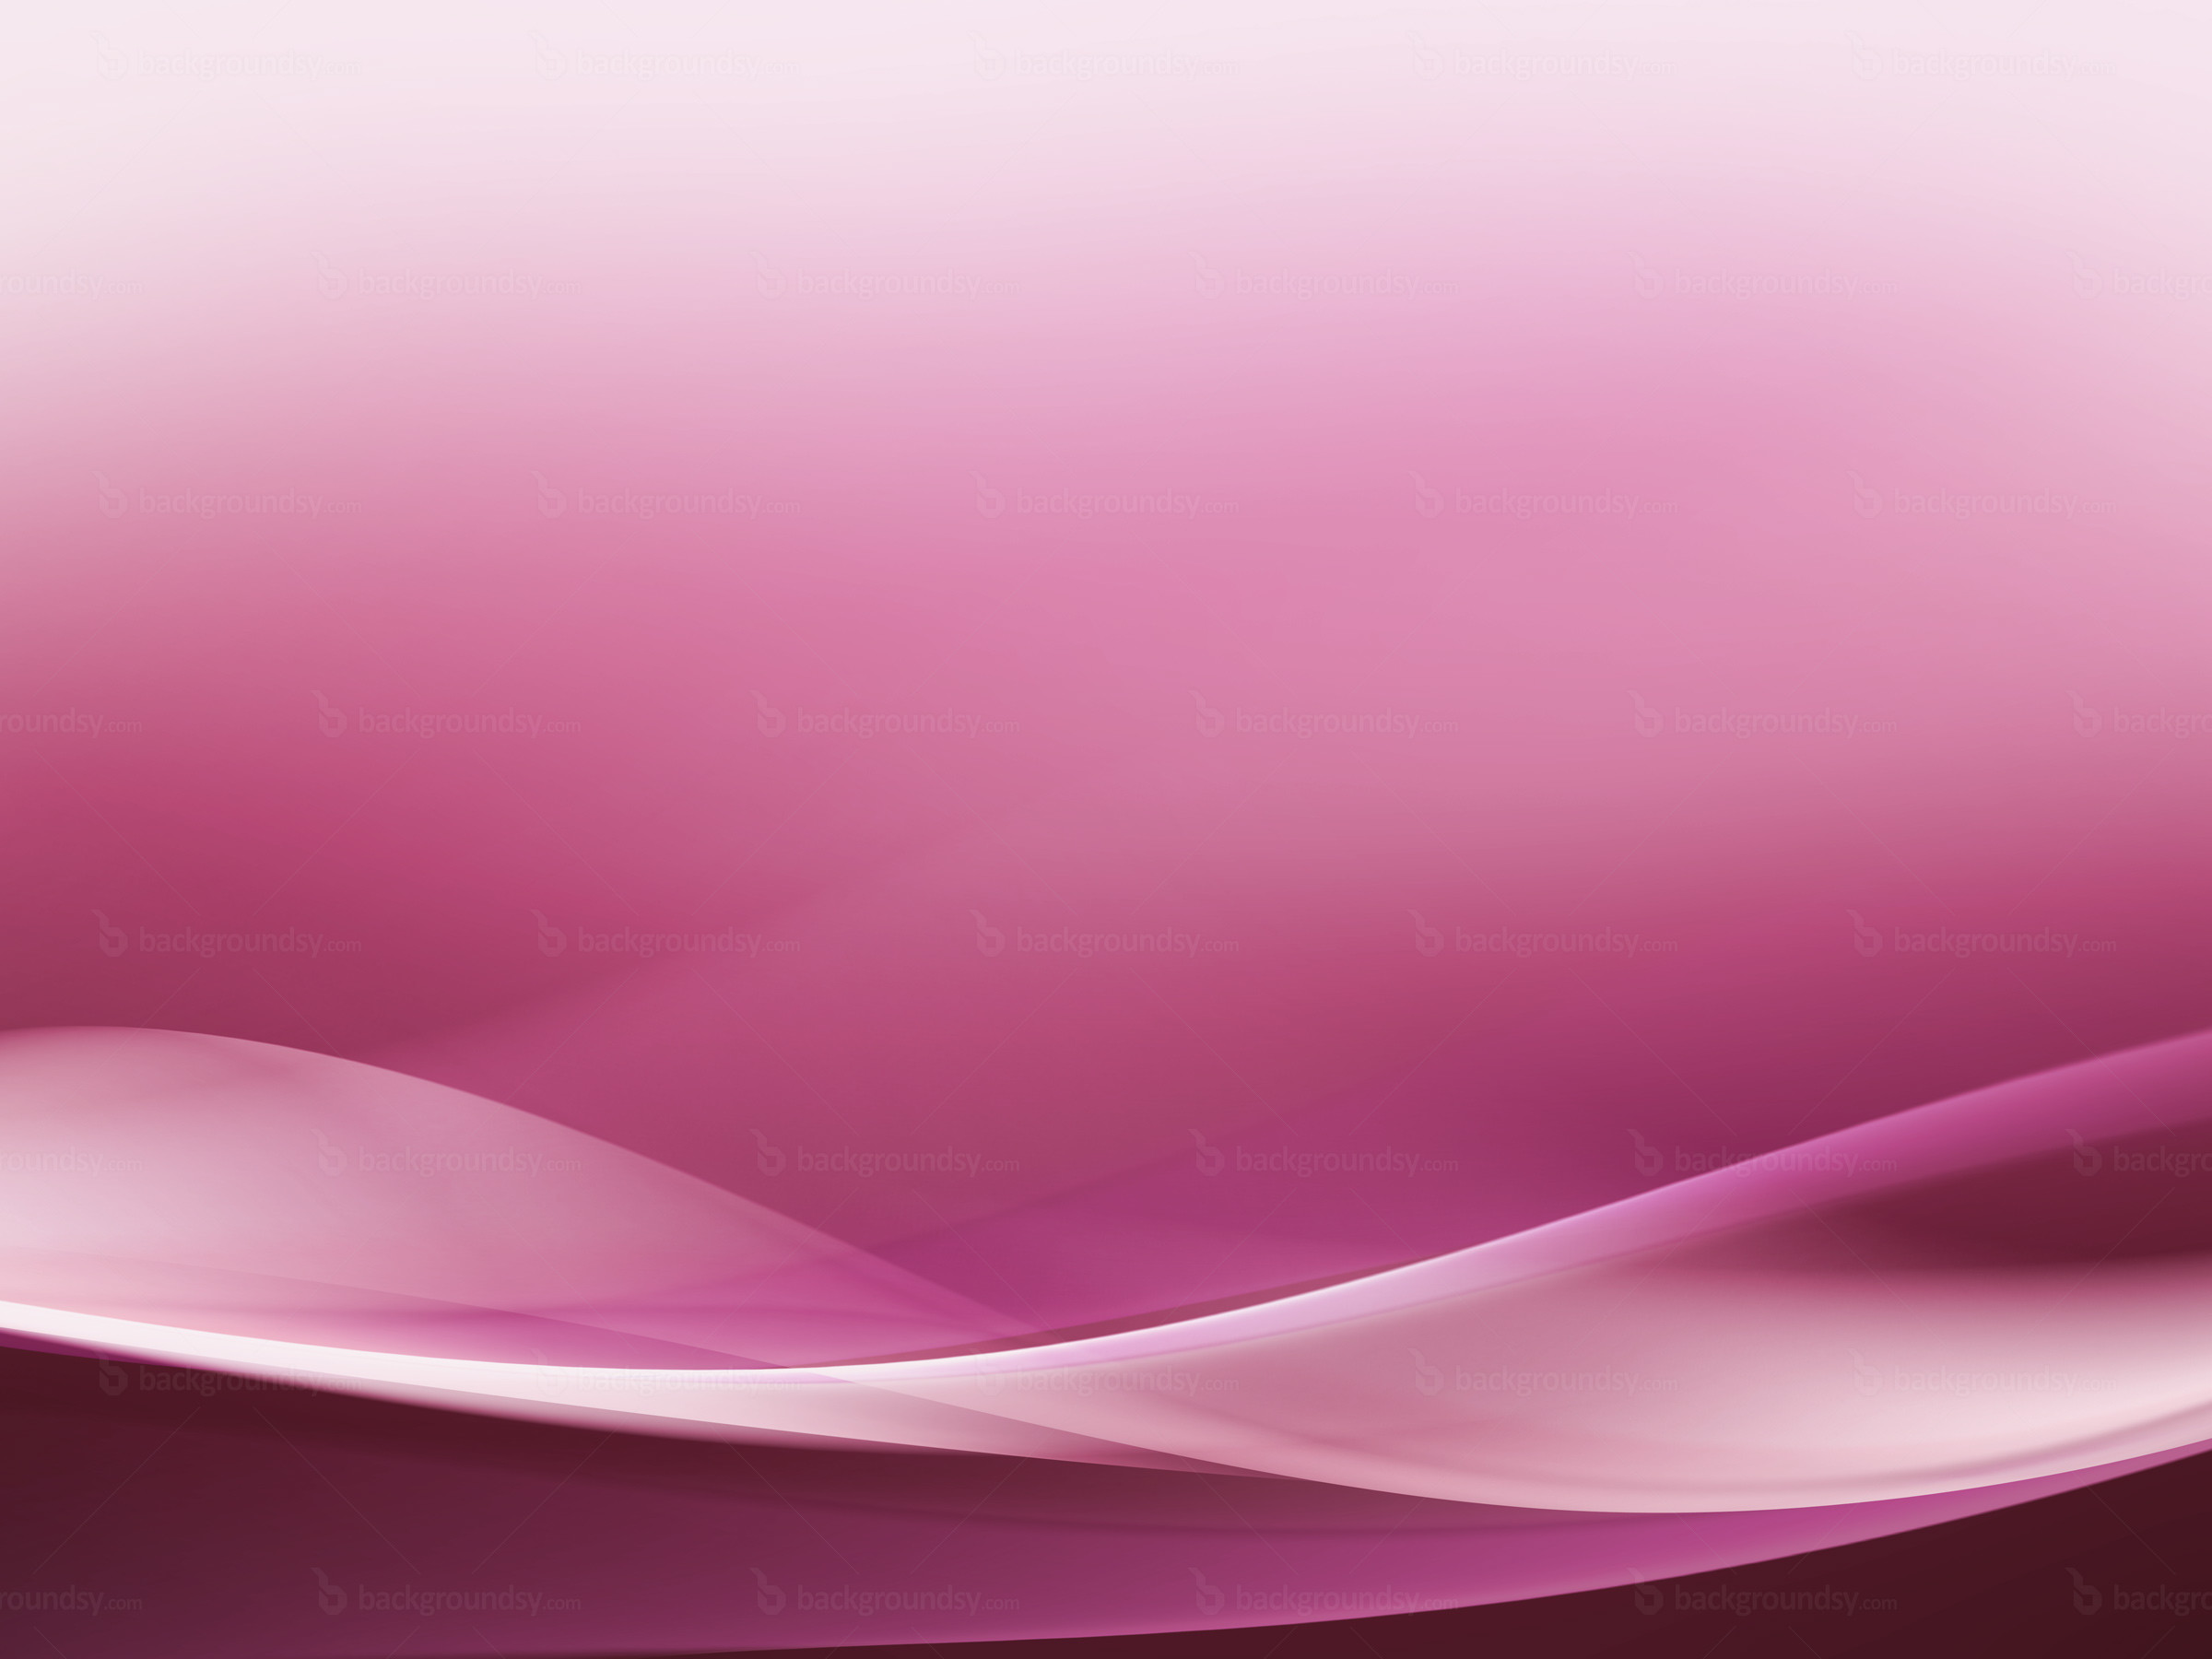 Pink background download cool hd wallpapers here